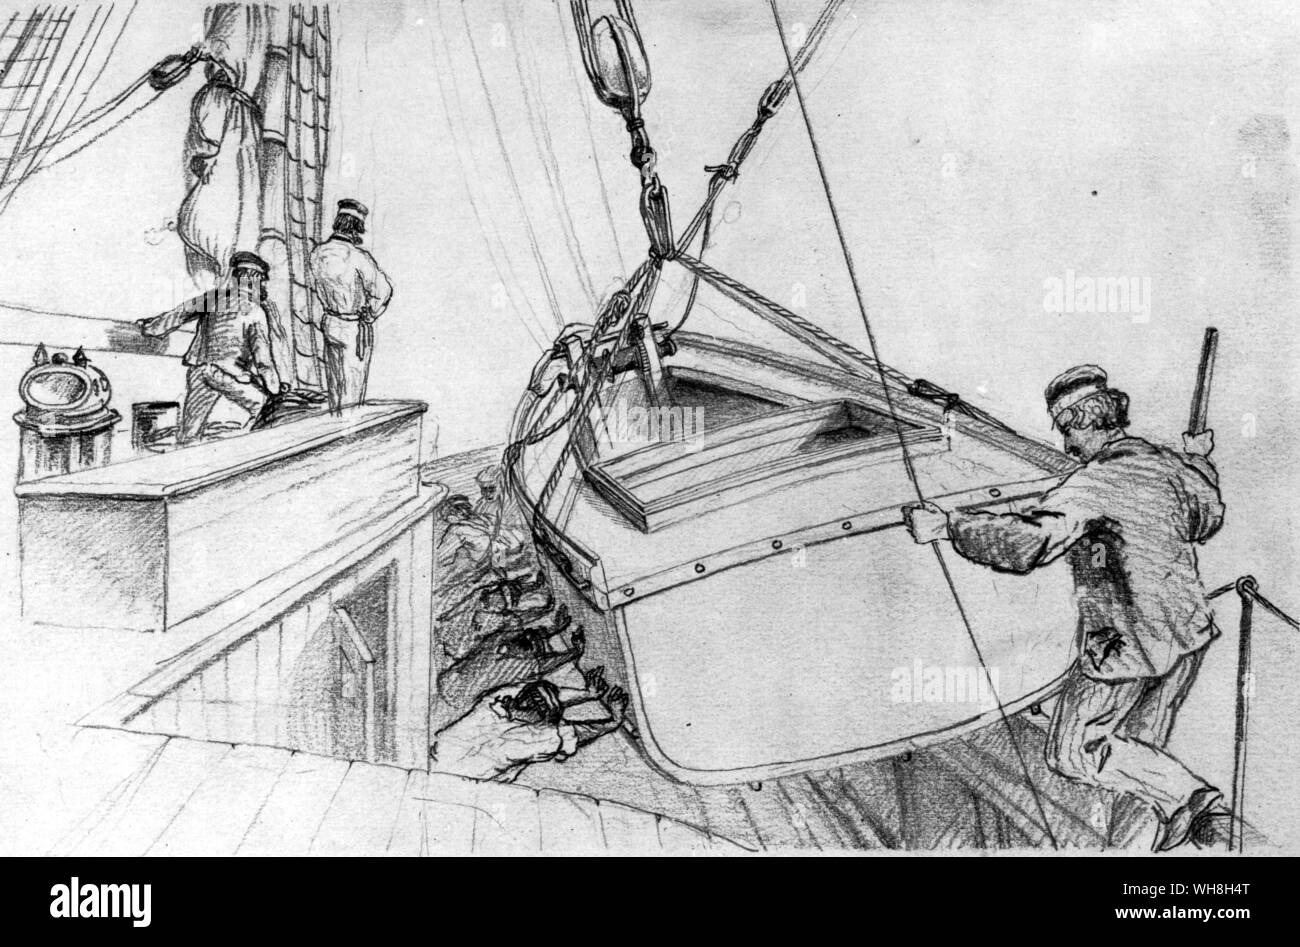 Livingstone (foreground) supervises the hoisting of the foremost section of the steam launch Ma Robert from his supply ship, Pearl, at the mouth of the Zambezi - a.m. 16 May 1858. Pencil drawing by Thomas Baines (1822-1875). David Livingstone (1813-1873), Scottish missionary and explorer, travelled extensively in Africa and discovered the Victoria Falls and the Zambezi River. The African Adventure - A History of Africa's Explorers by Timothy Severin, page 195. Stock Photo